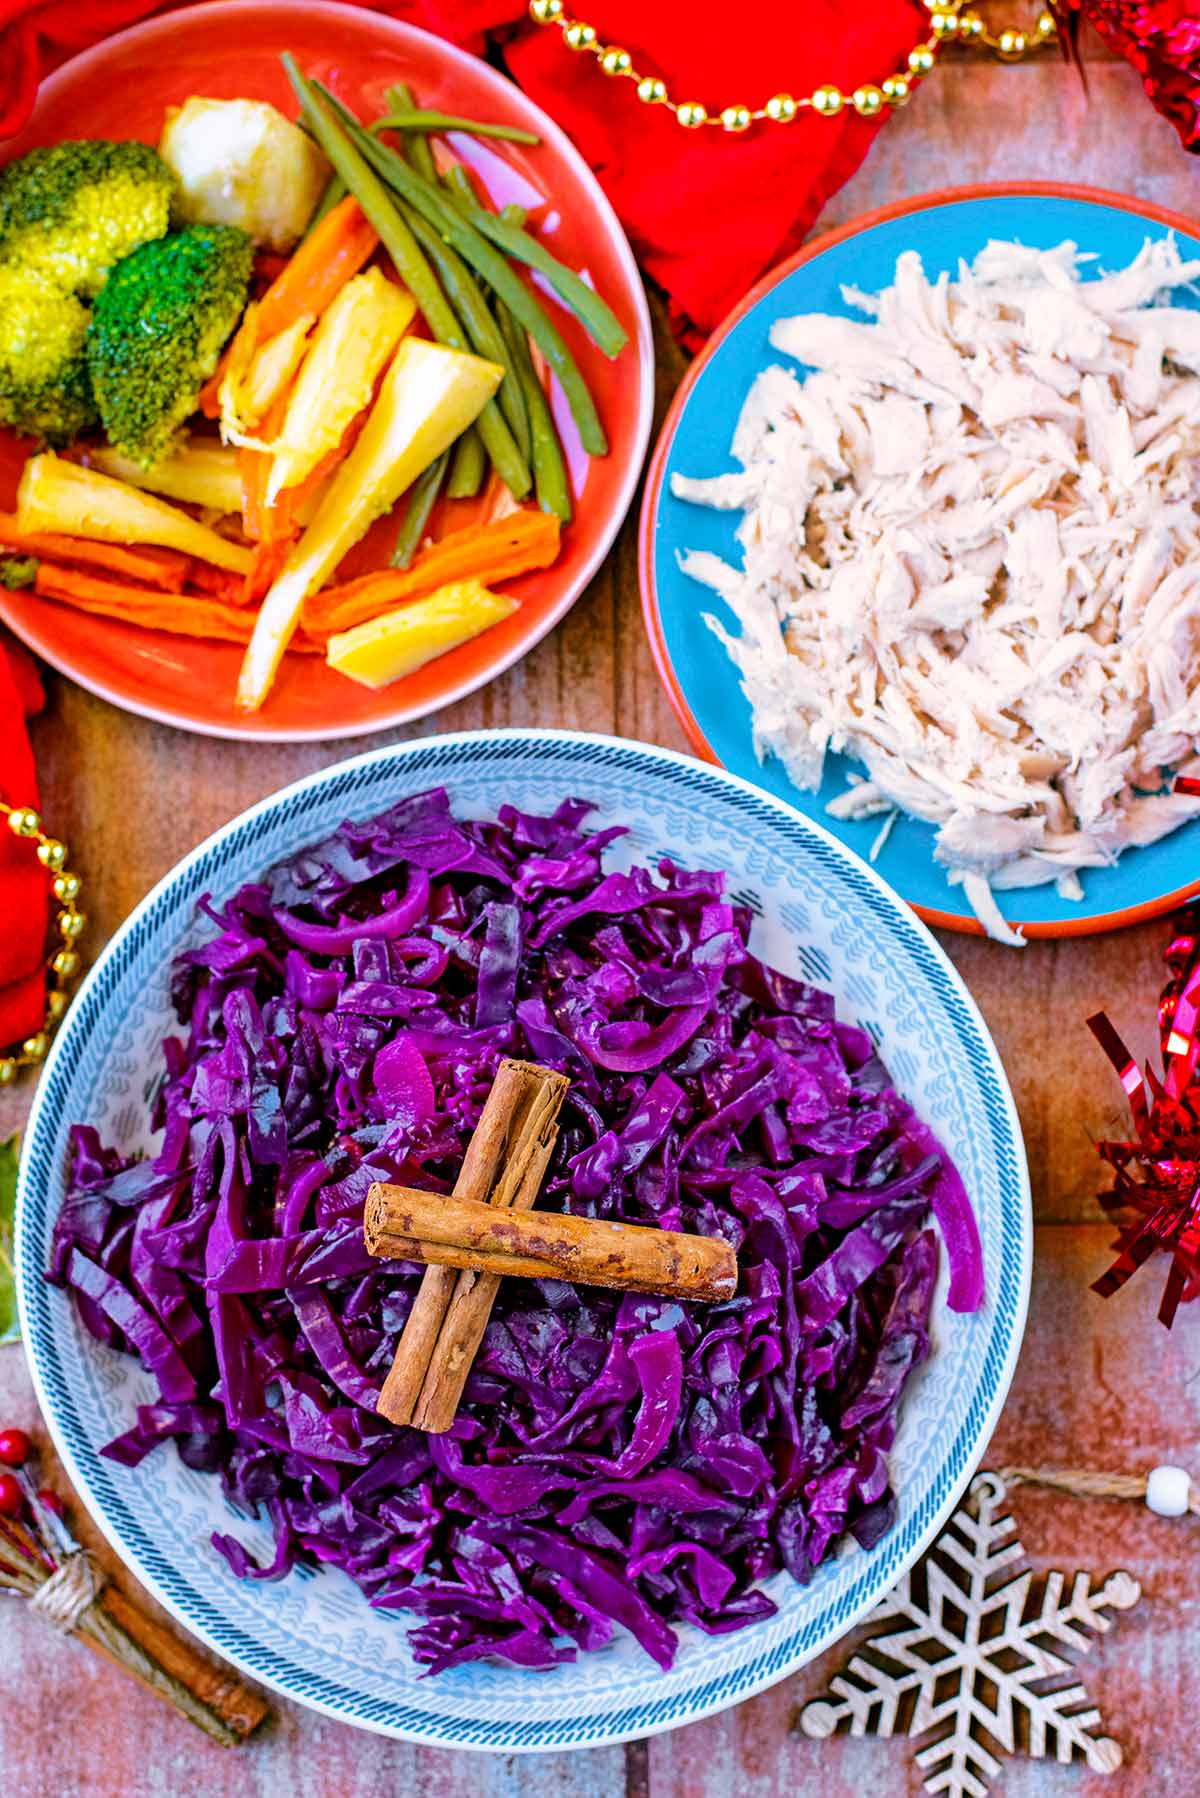 A bowl of cooked red cabbage next to some shredded turkey and some roast vegetables.